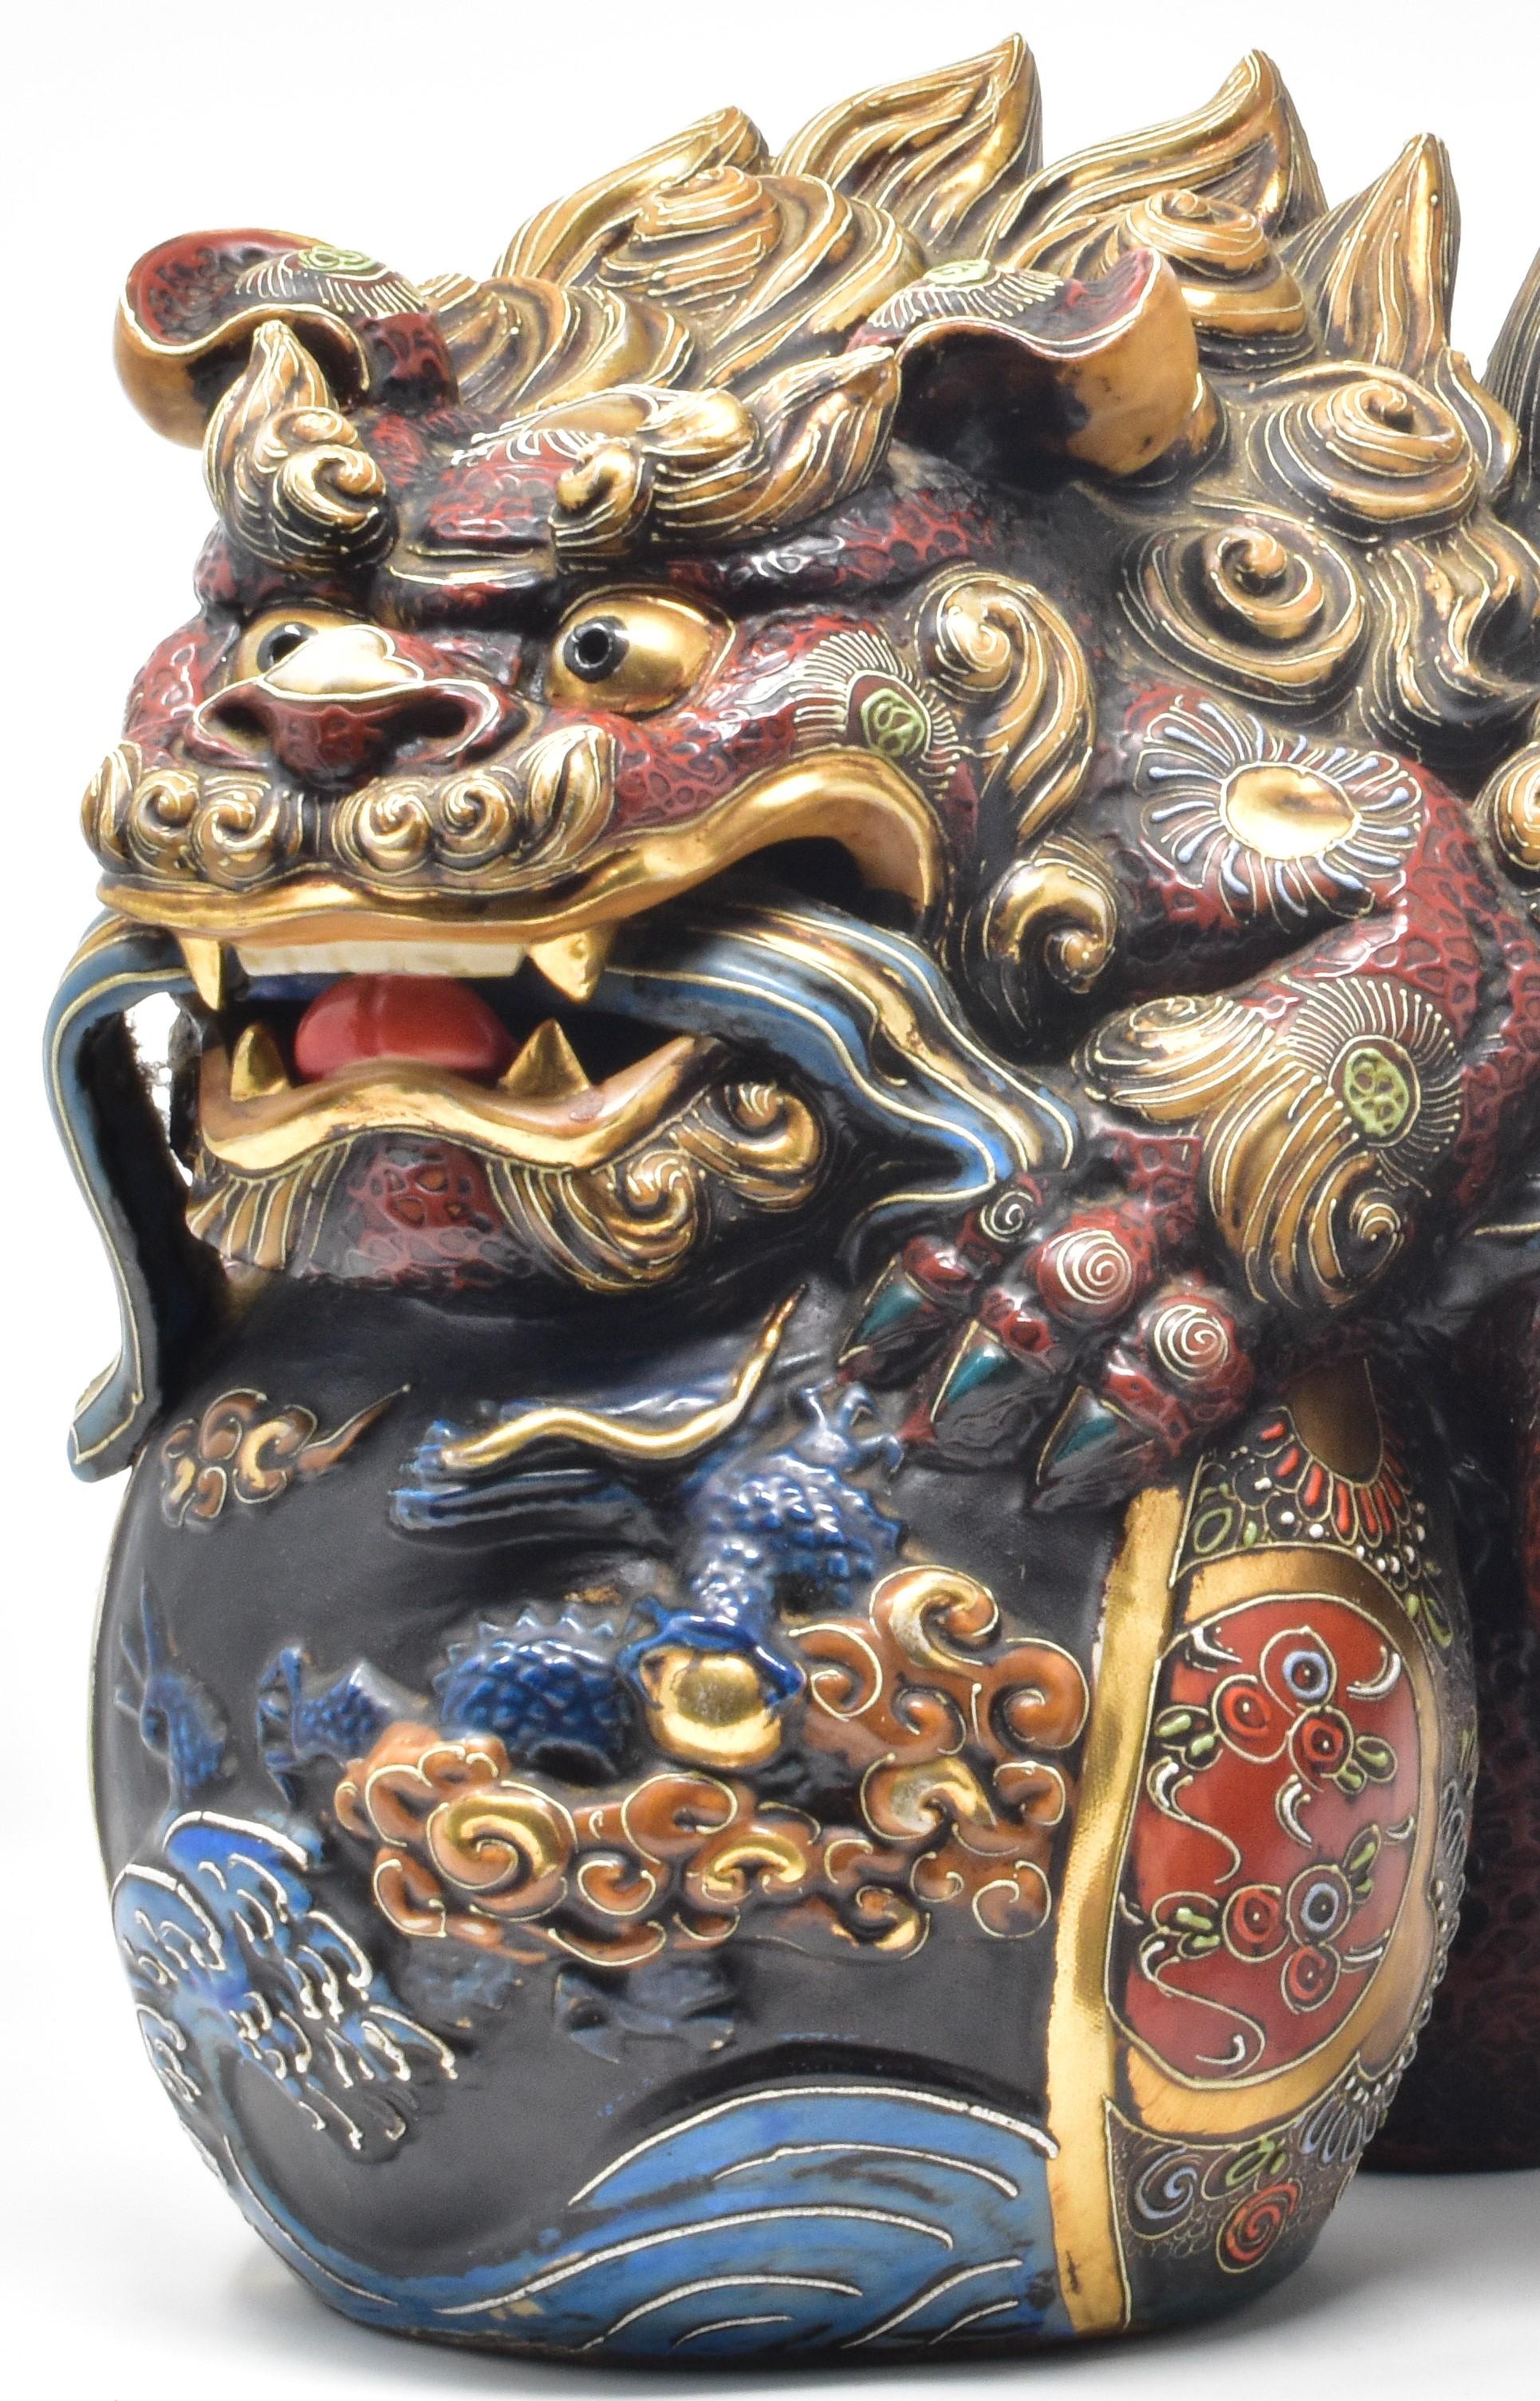 This large vintage Japanese ceramic shishi lion signed “Kutani Sueyoshi” is from
the early postwar period. Extremely intricately hand painted in the five colors of the traditional Kutani palette (yellow, red, blue, green and purple) and extensively